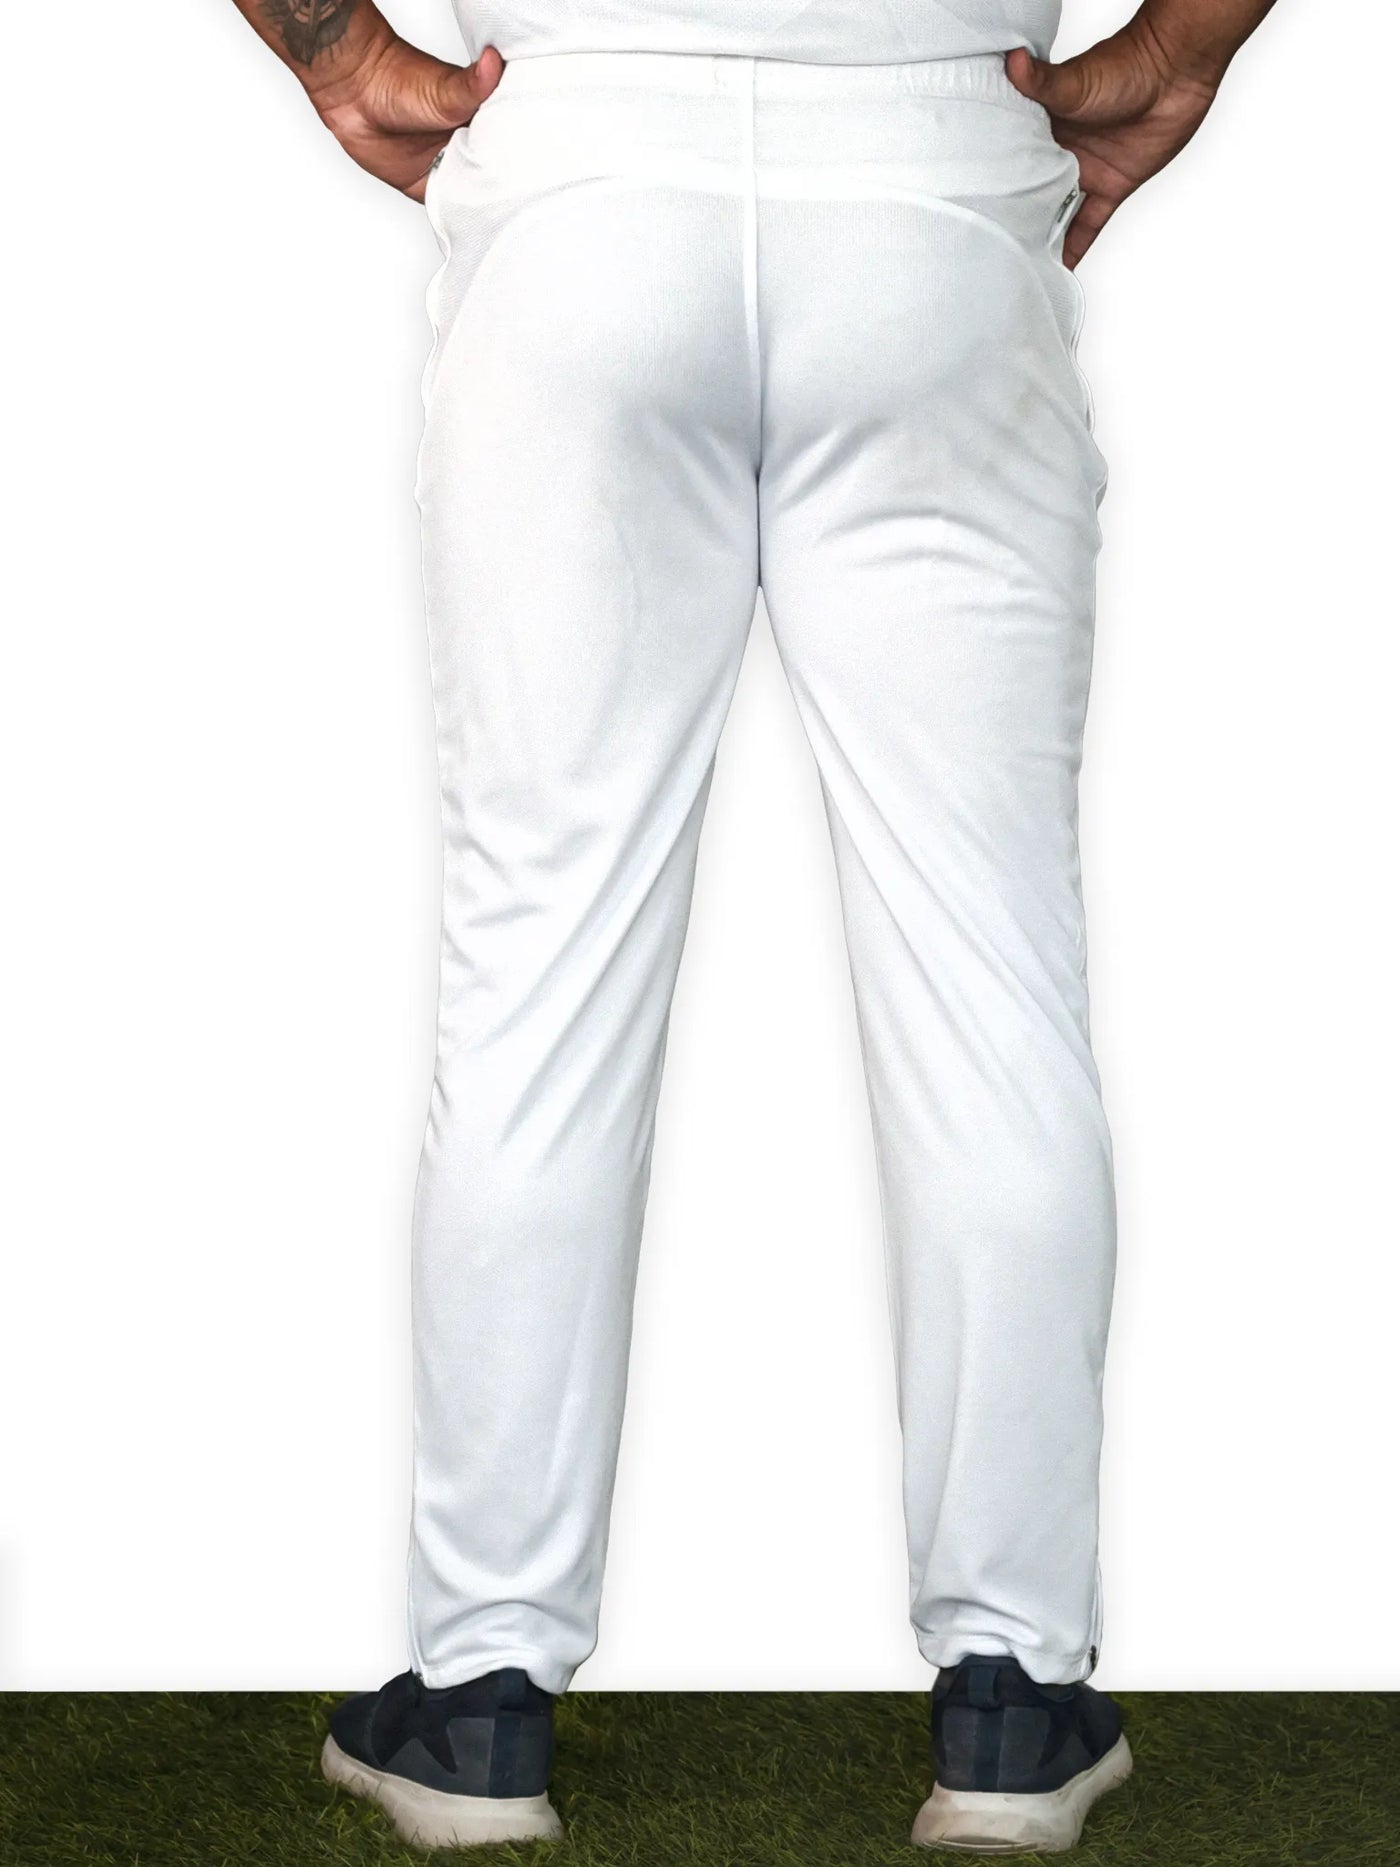 Solid White Cricket Match Pants